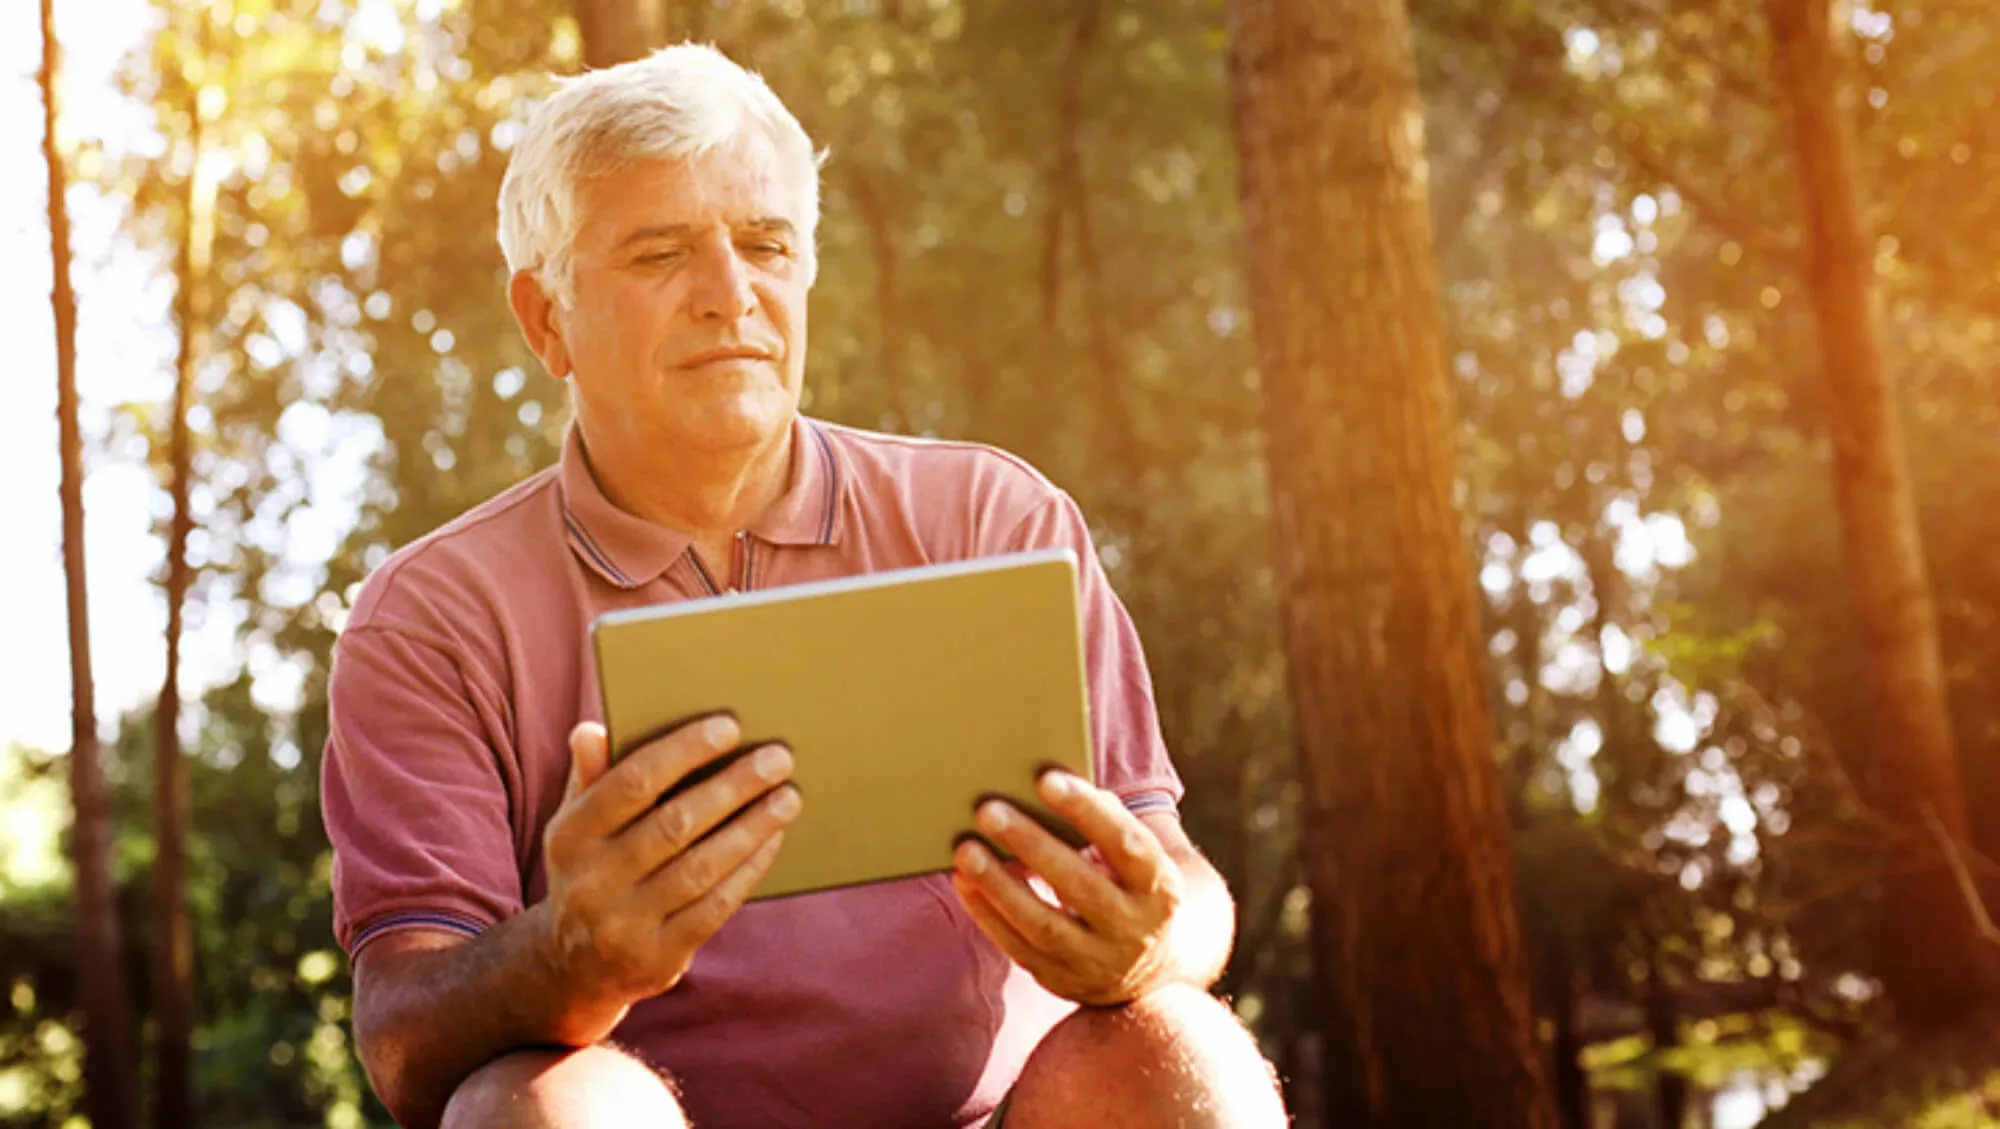 Man sitting looking at a tablet.